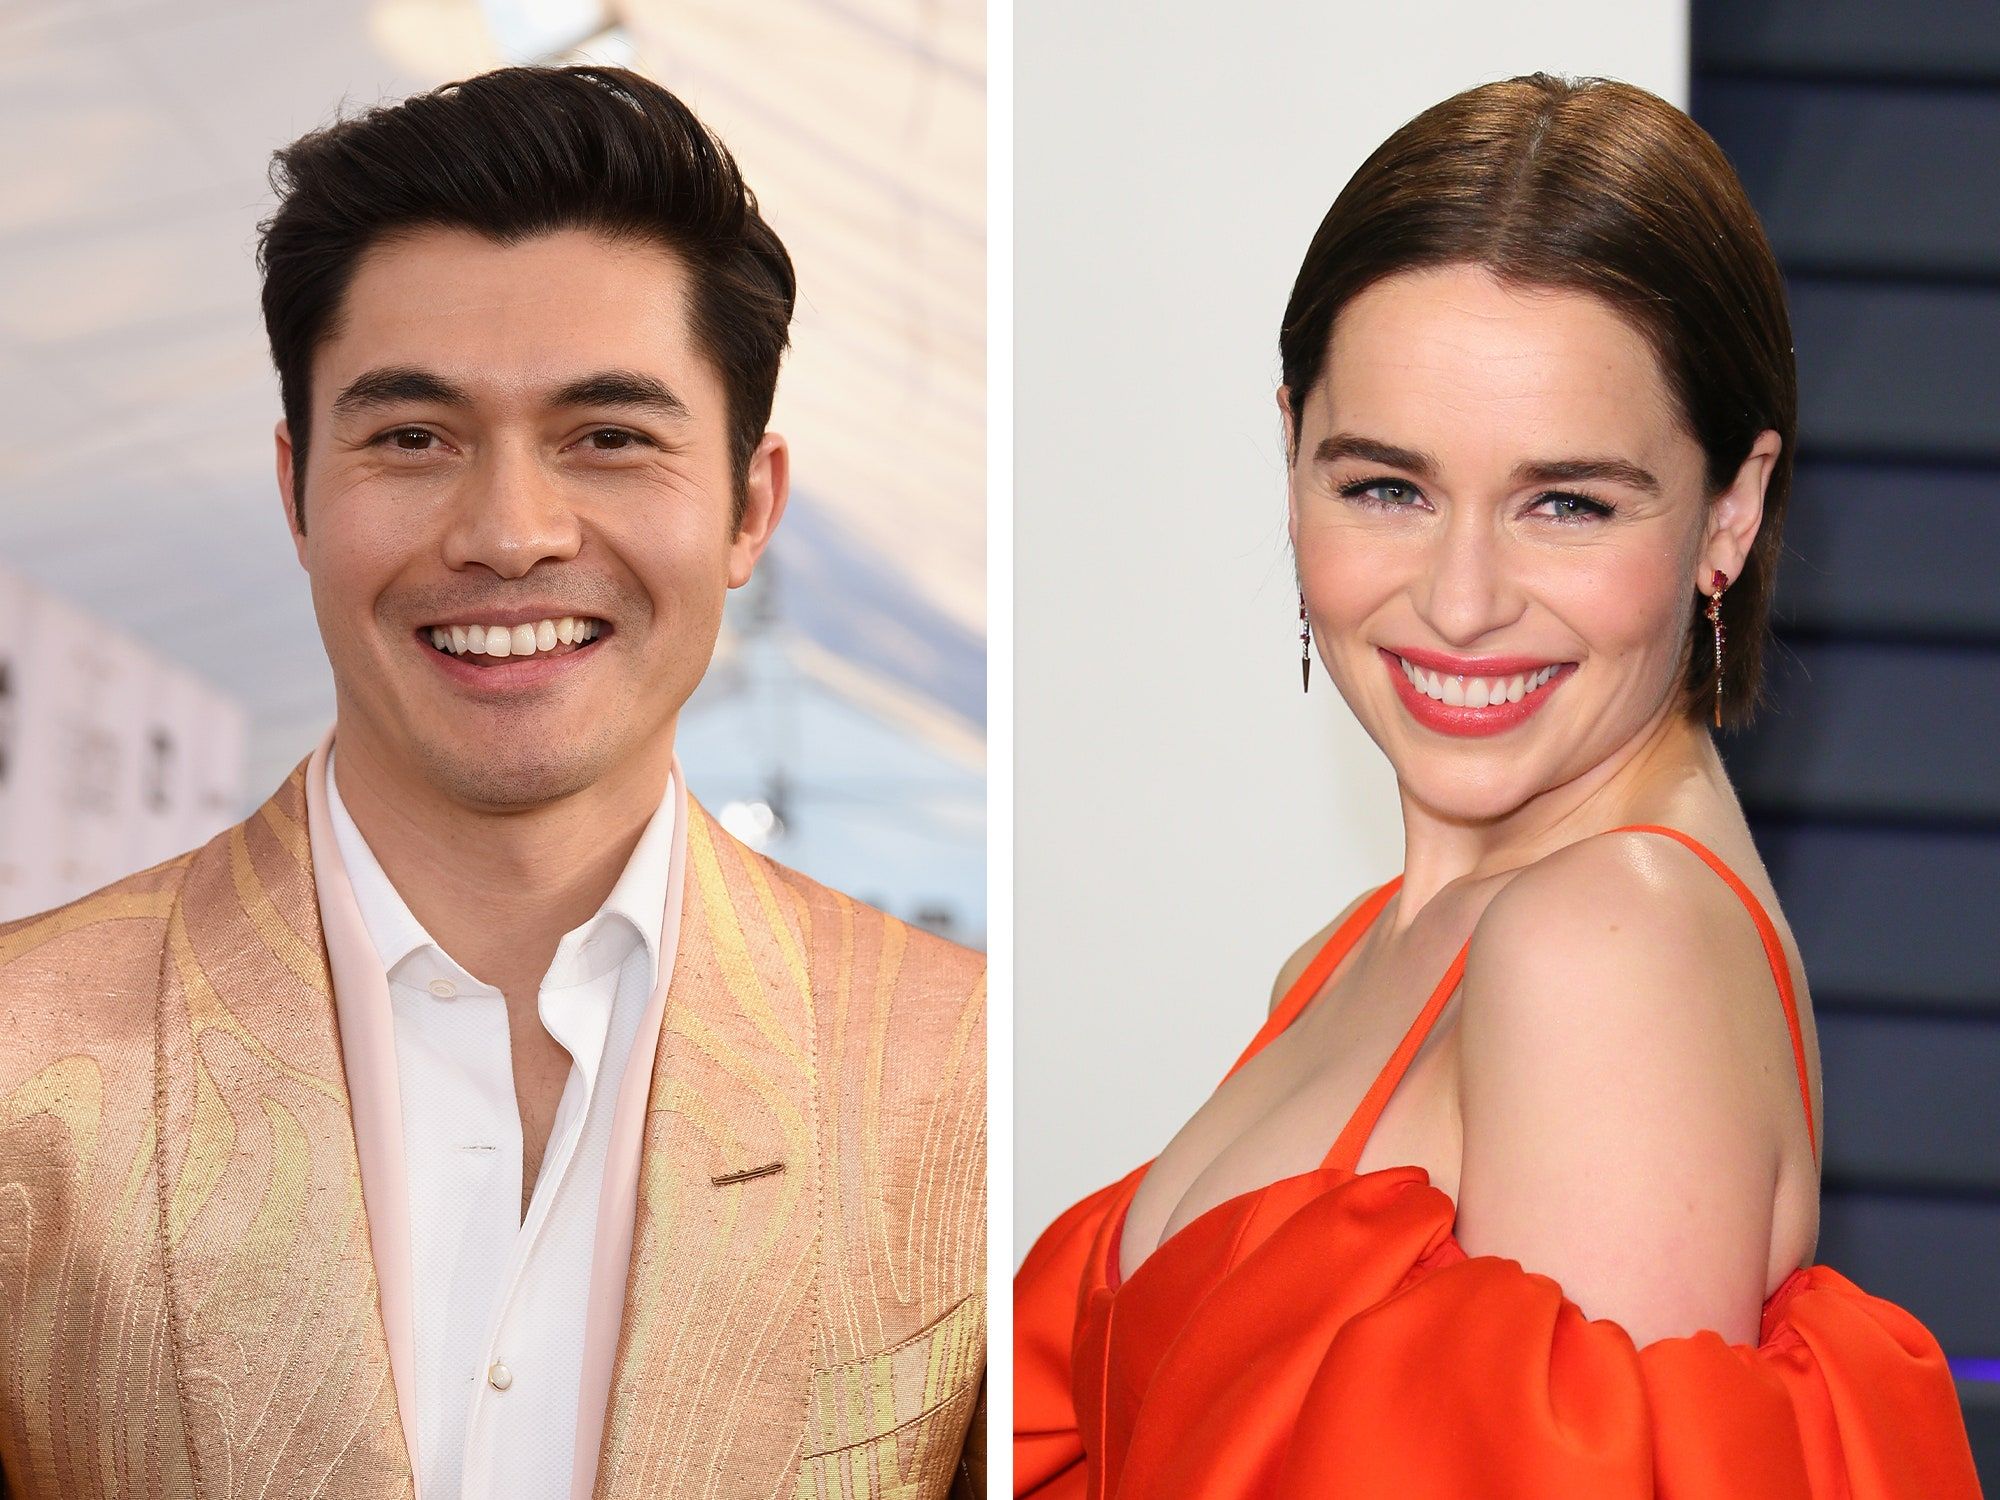 Emilia Clarke And Henry Golding In New “Last Christmas” Are Holiday Rom Com Couple Goals